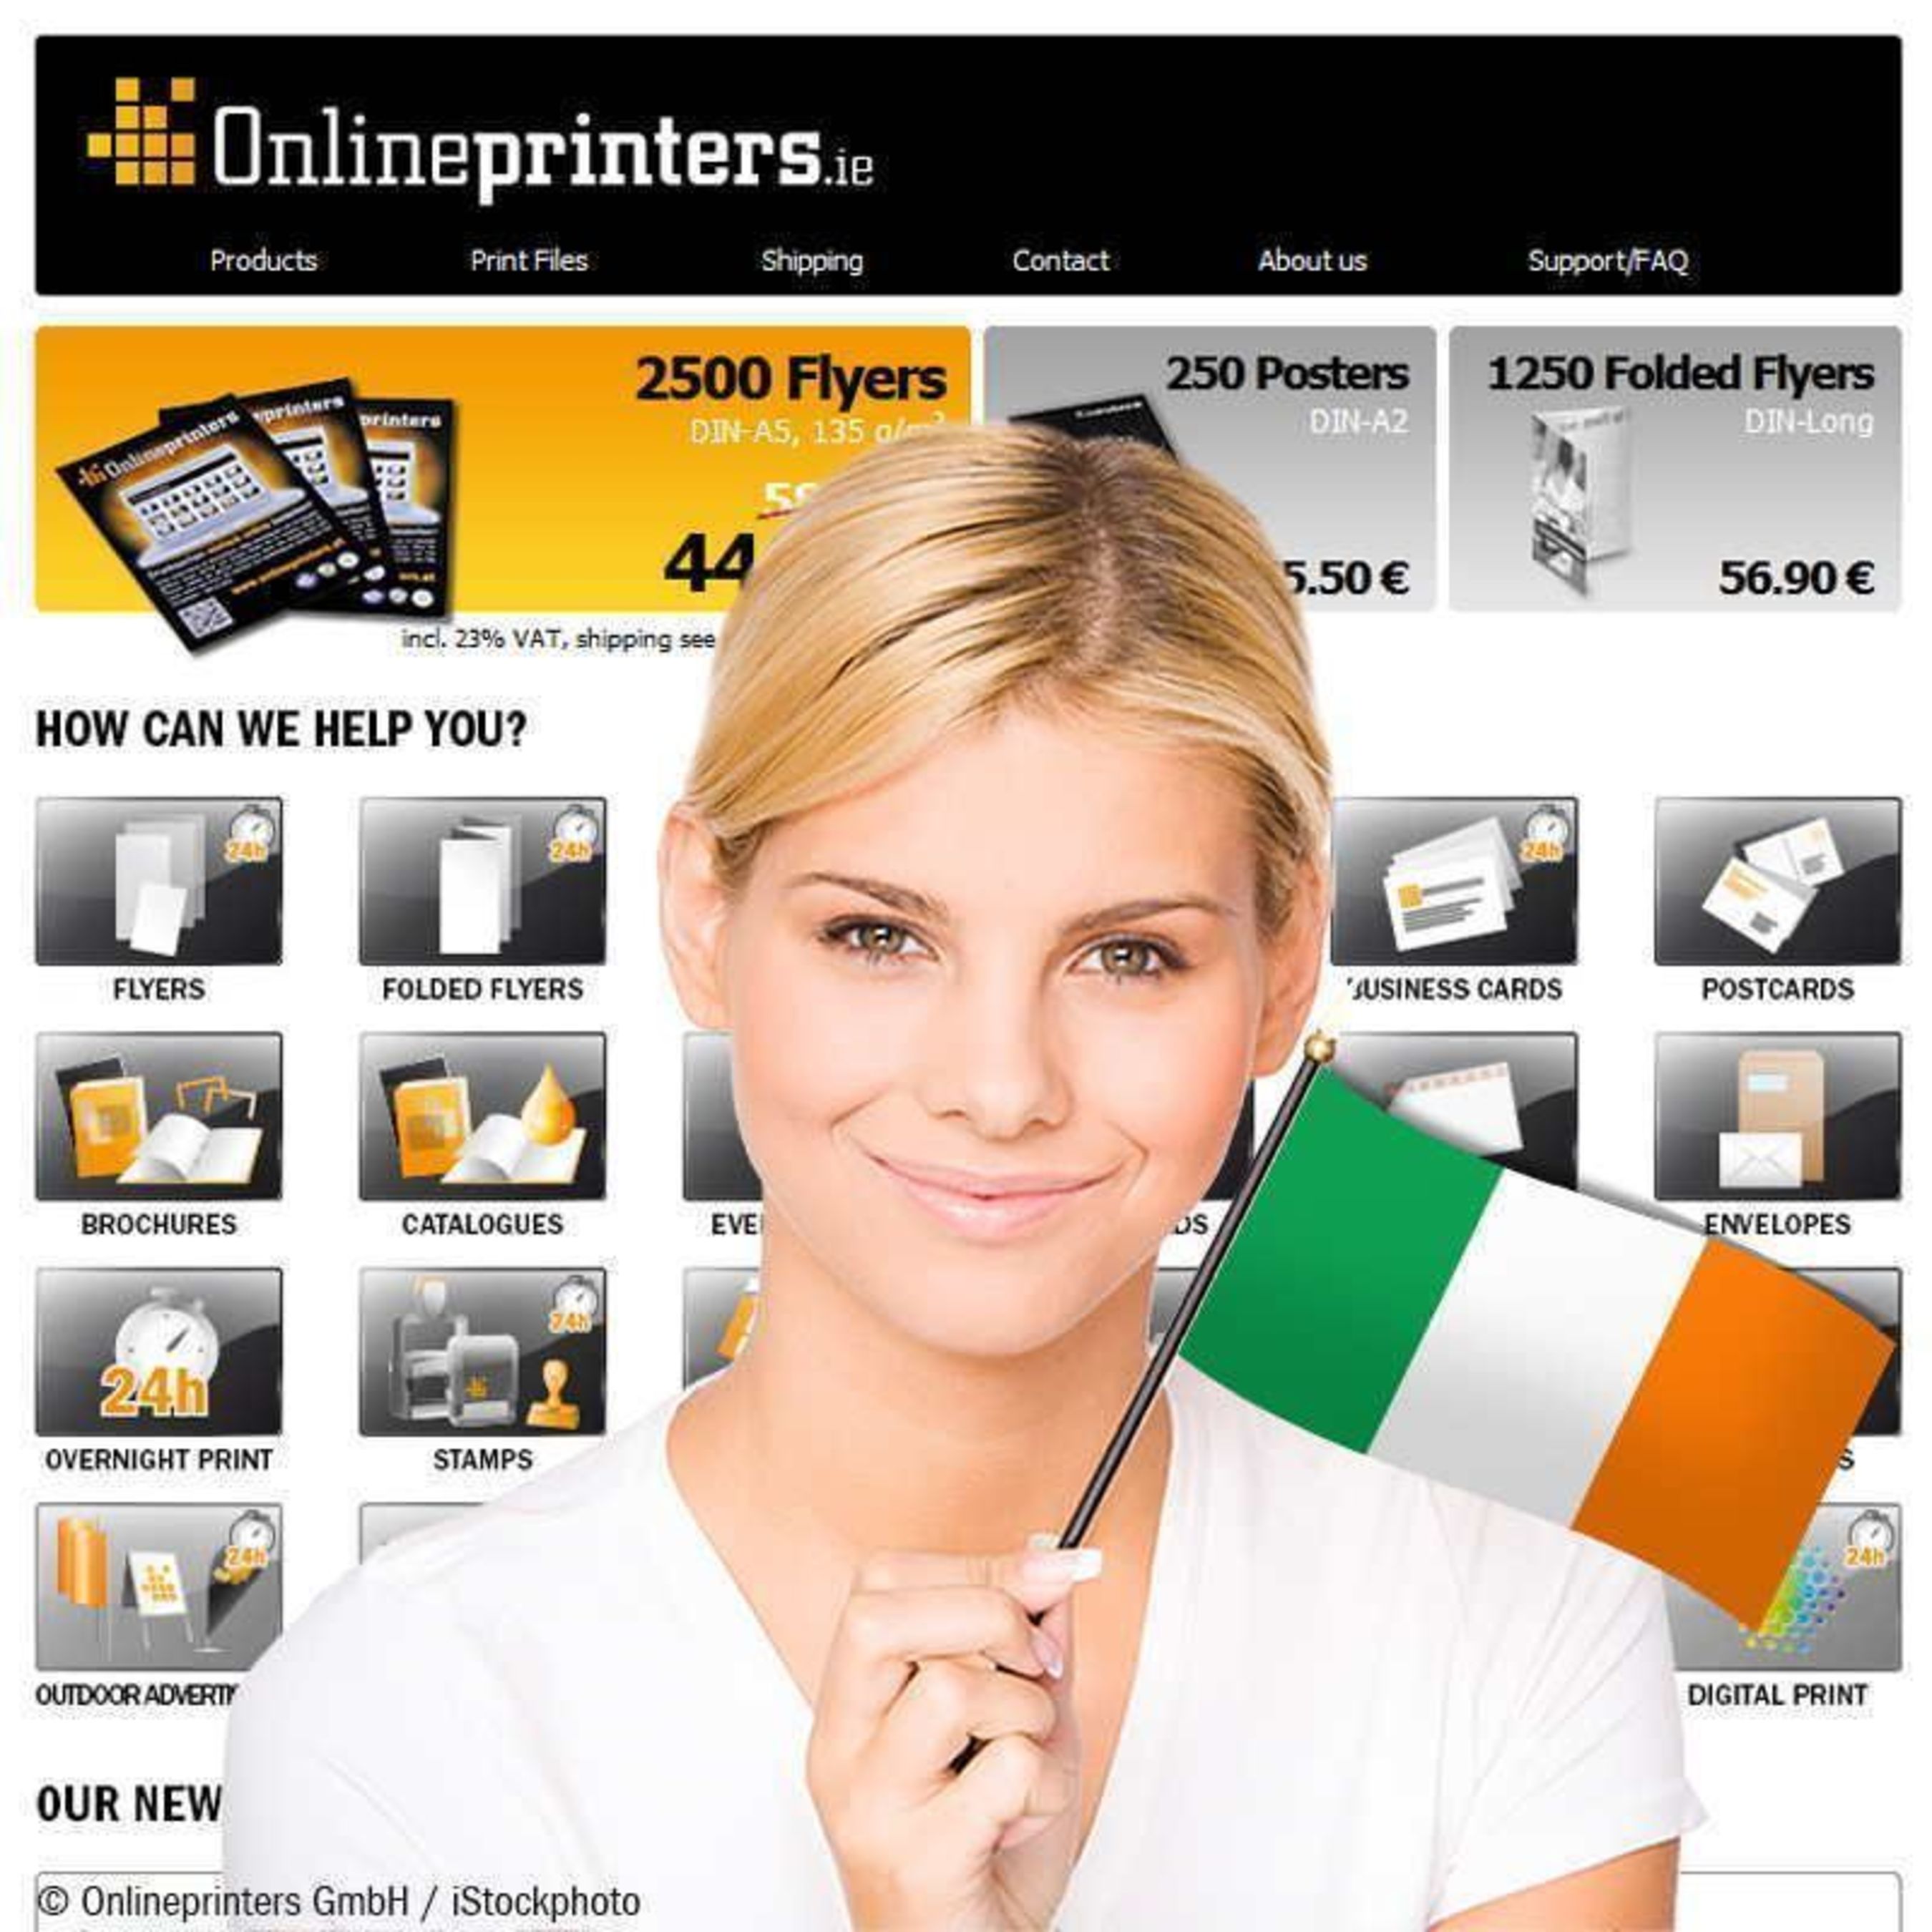 Printed products from the online shop: With the launch of the Irish web shop, Onlineprinters GmbH now operates eleven country shops for printed products in the market. In the online shop onlineprinters.ie, business and private customers from Ireland find all standard print products, such as flyers, business cards, posters, catalogues and brochures, in premium offset print quality as well as large-sized advertisement systems in flexible digital printing. Copyright: Onlineprinters / iStockphoto (PRNewsFoto/Onlineprinters GmbH)